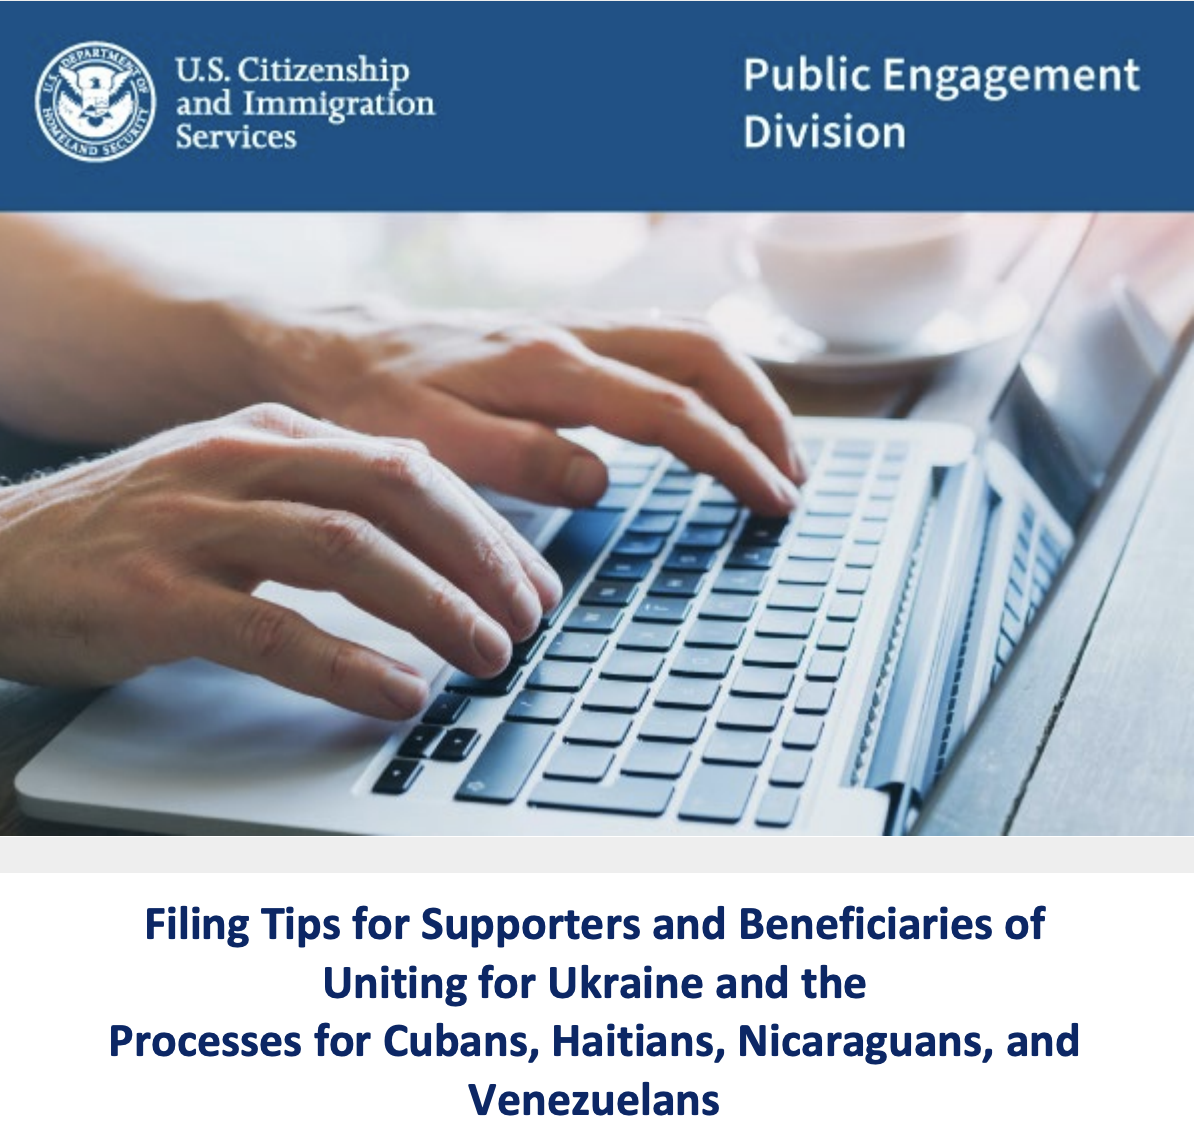 Filing Tips for Supporters and Beneficiaries of Uniting for Ukraine and the Processes for Cubans, Haitians, Nicaraguans, and Venezuelans